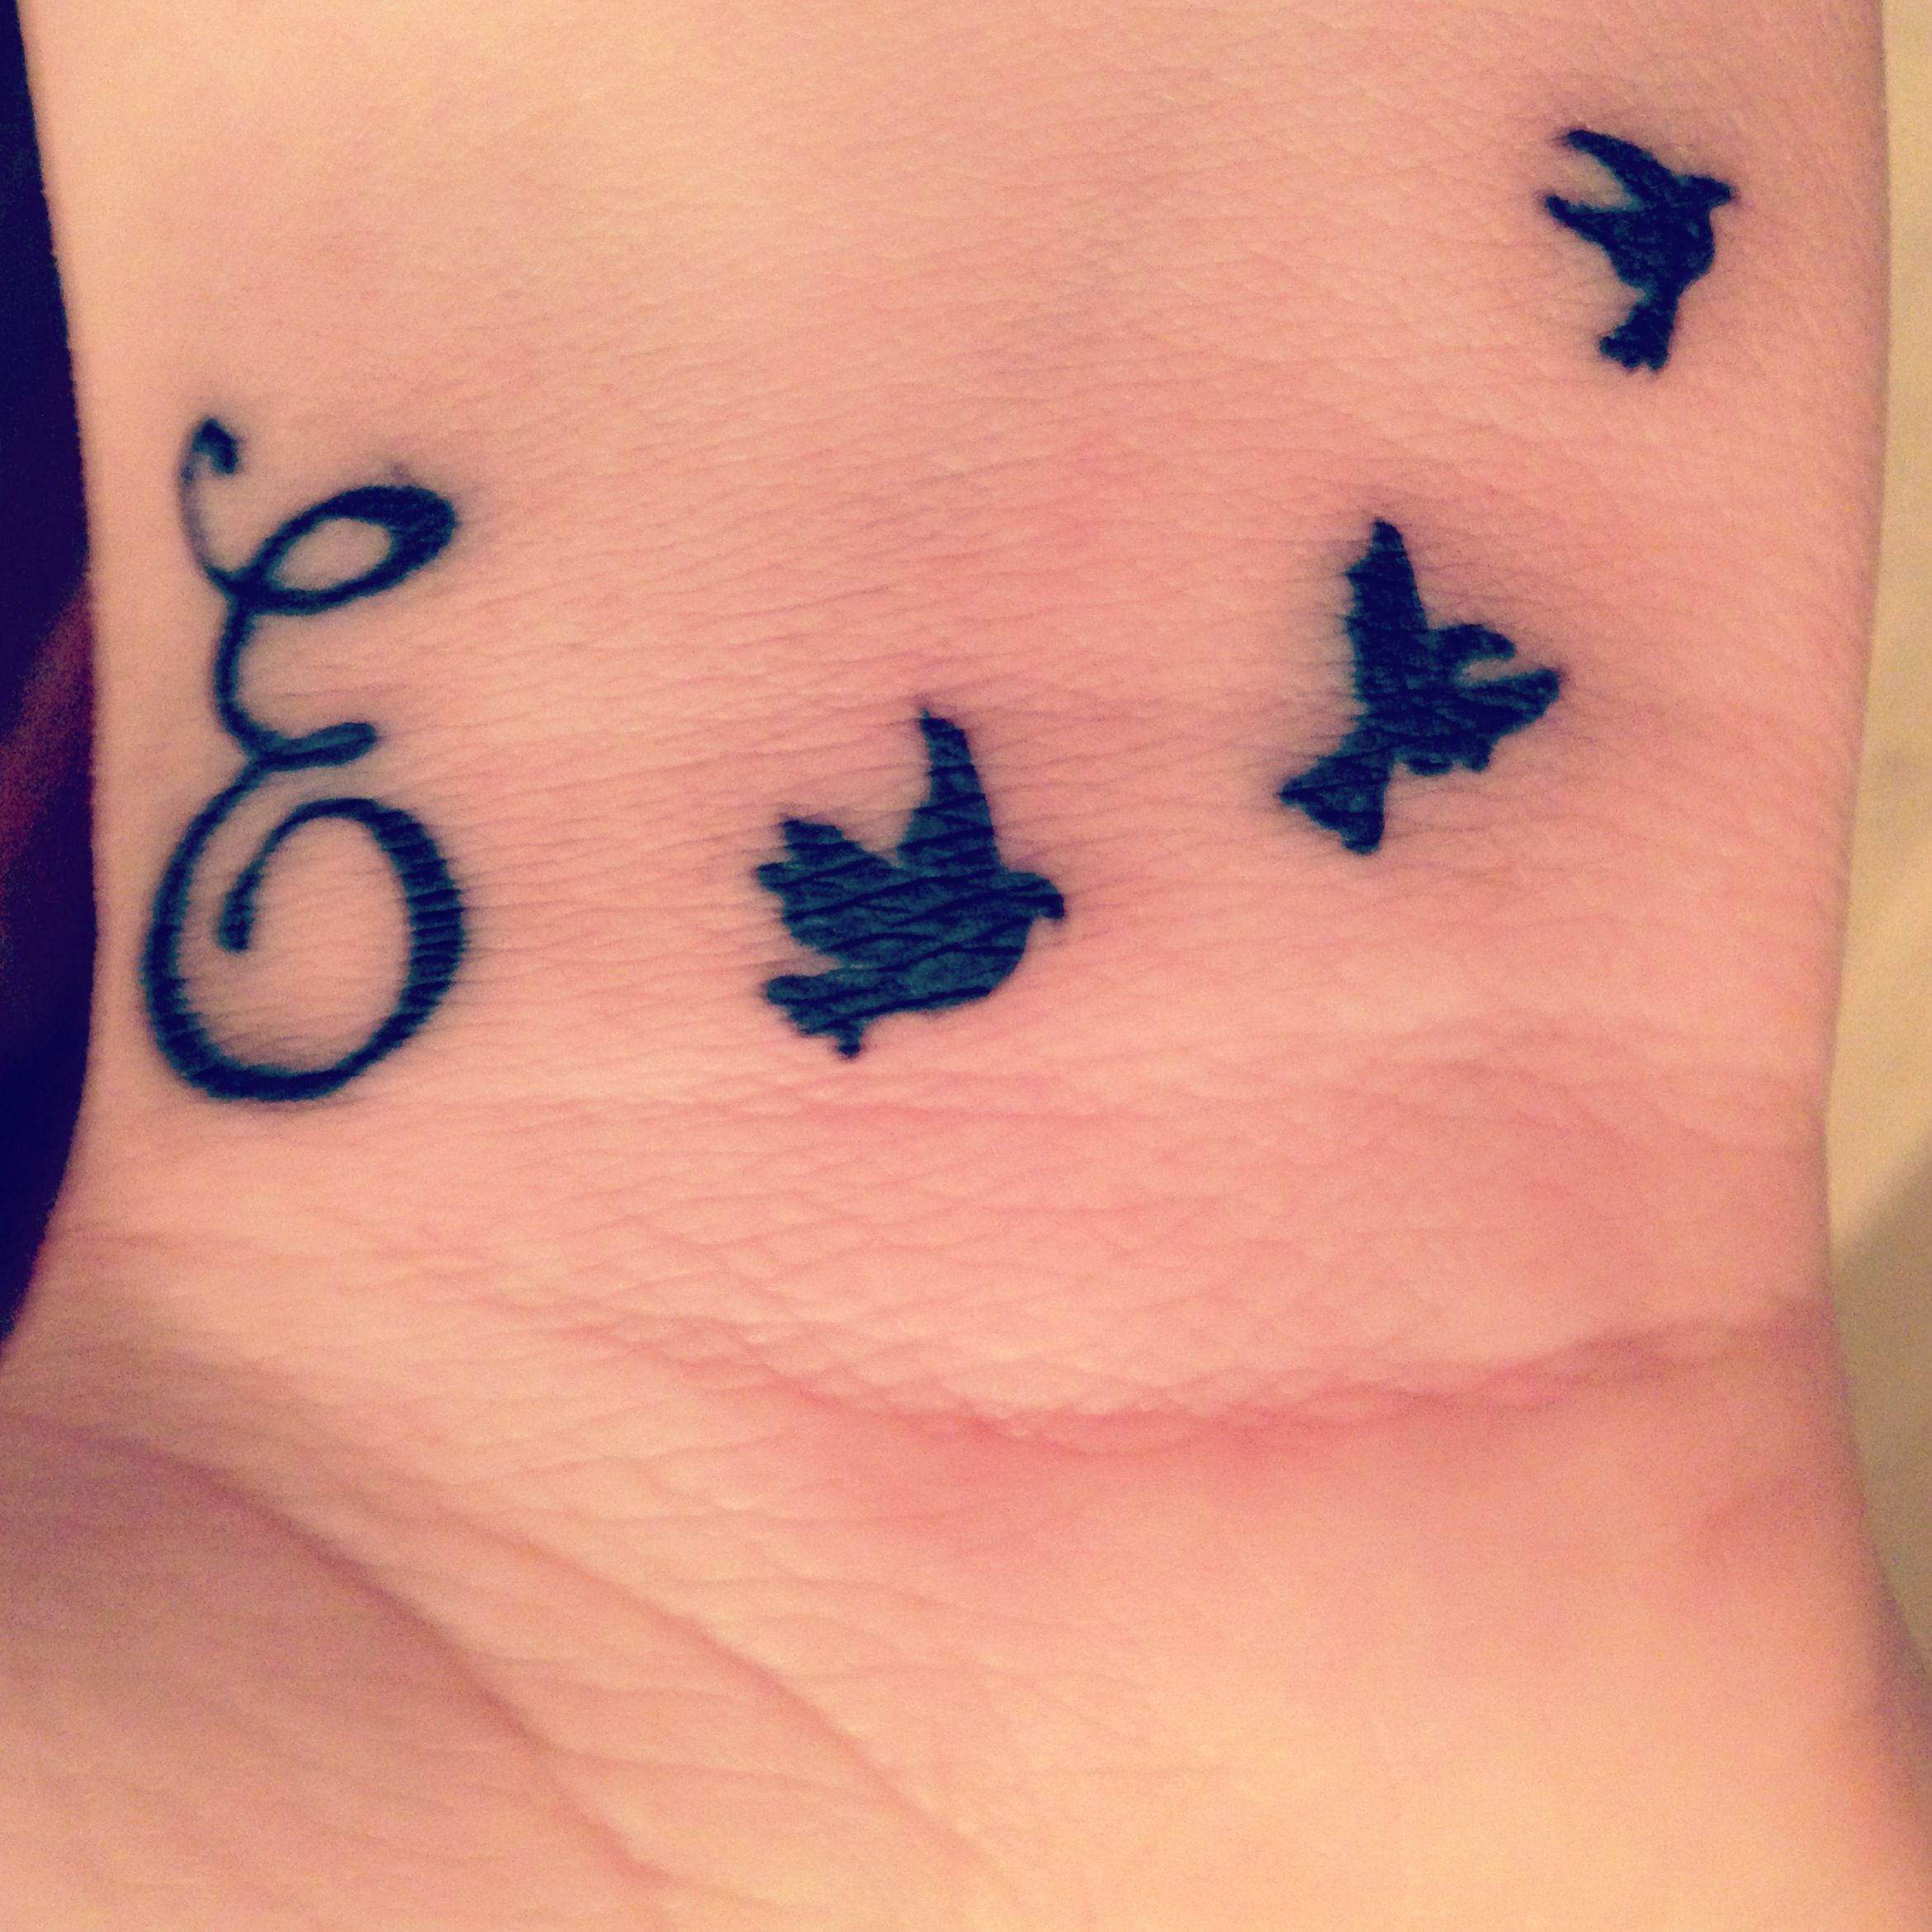 Letter E And Birds Tattoo On Wrist Tattoos And Piercings Wrist within sizing 2340 X 2340